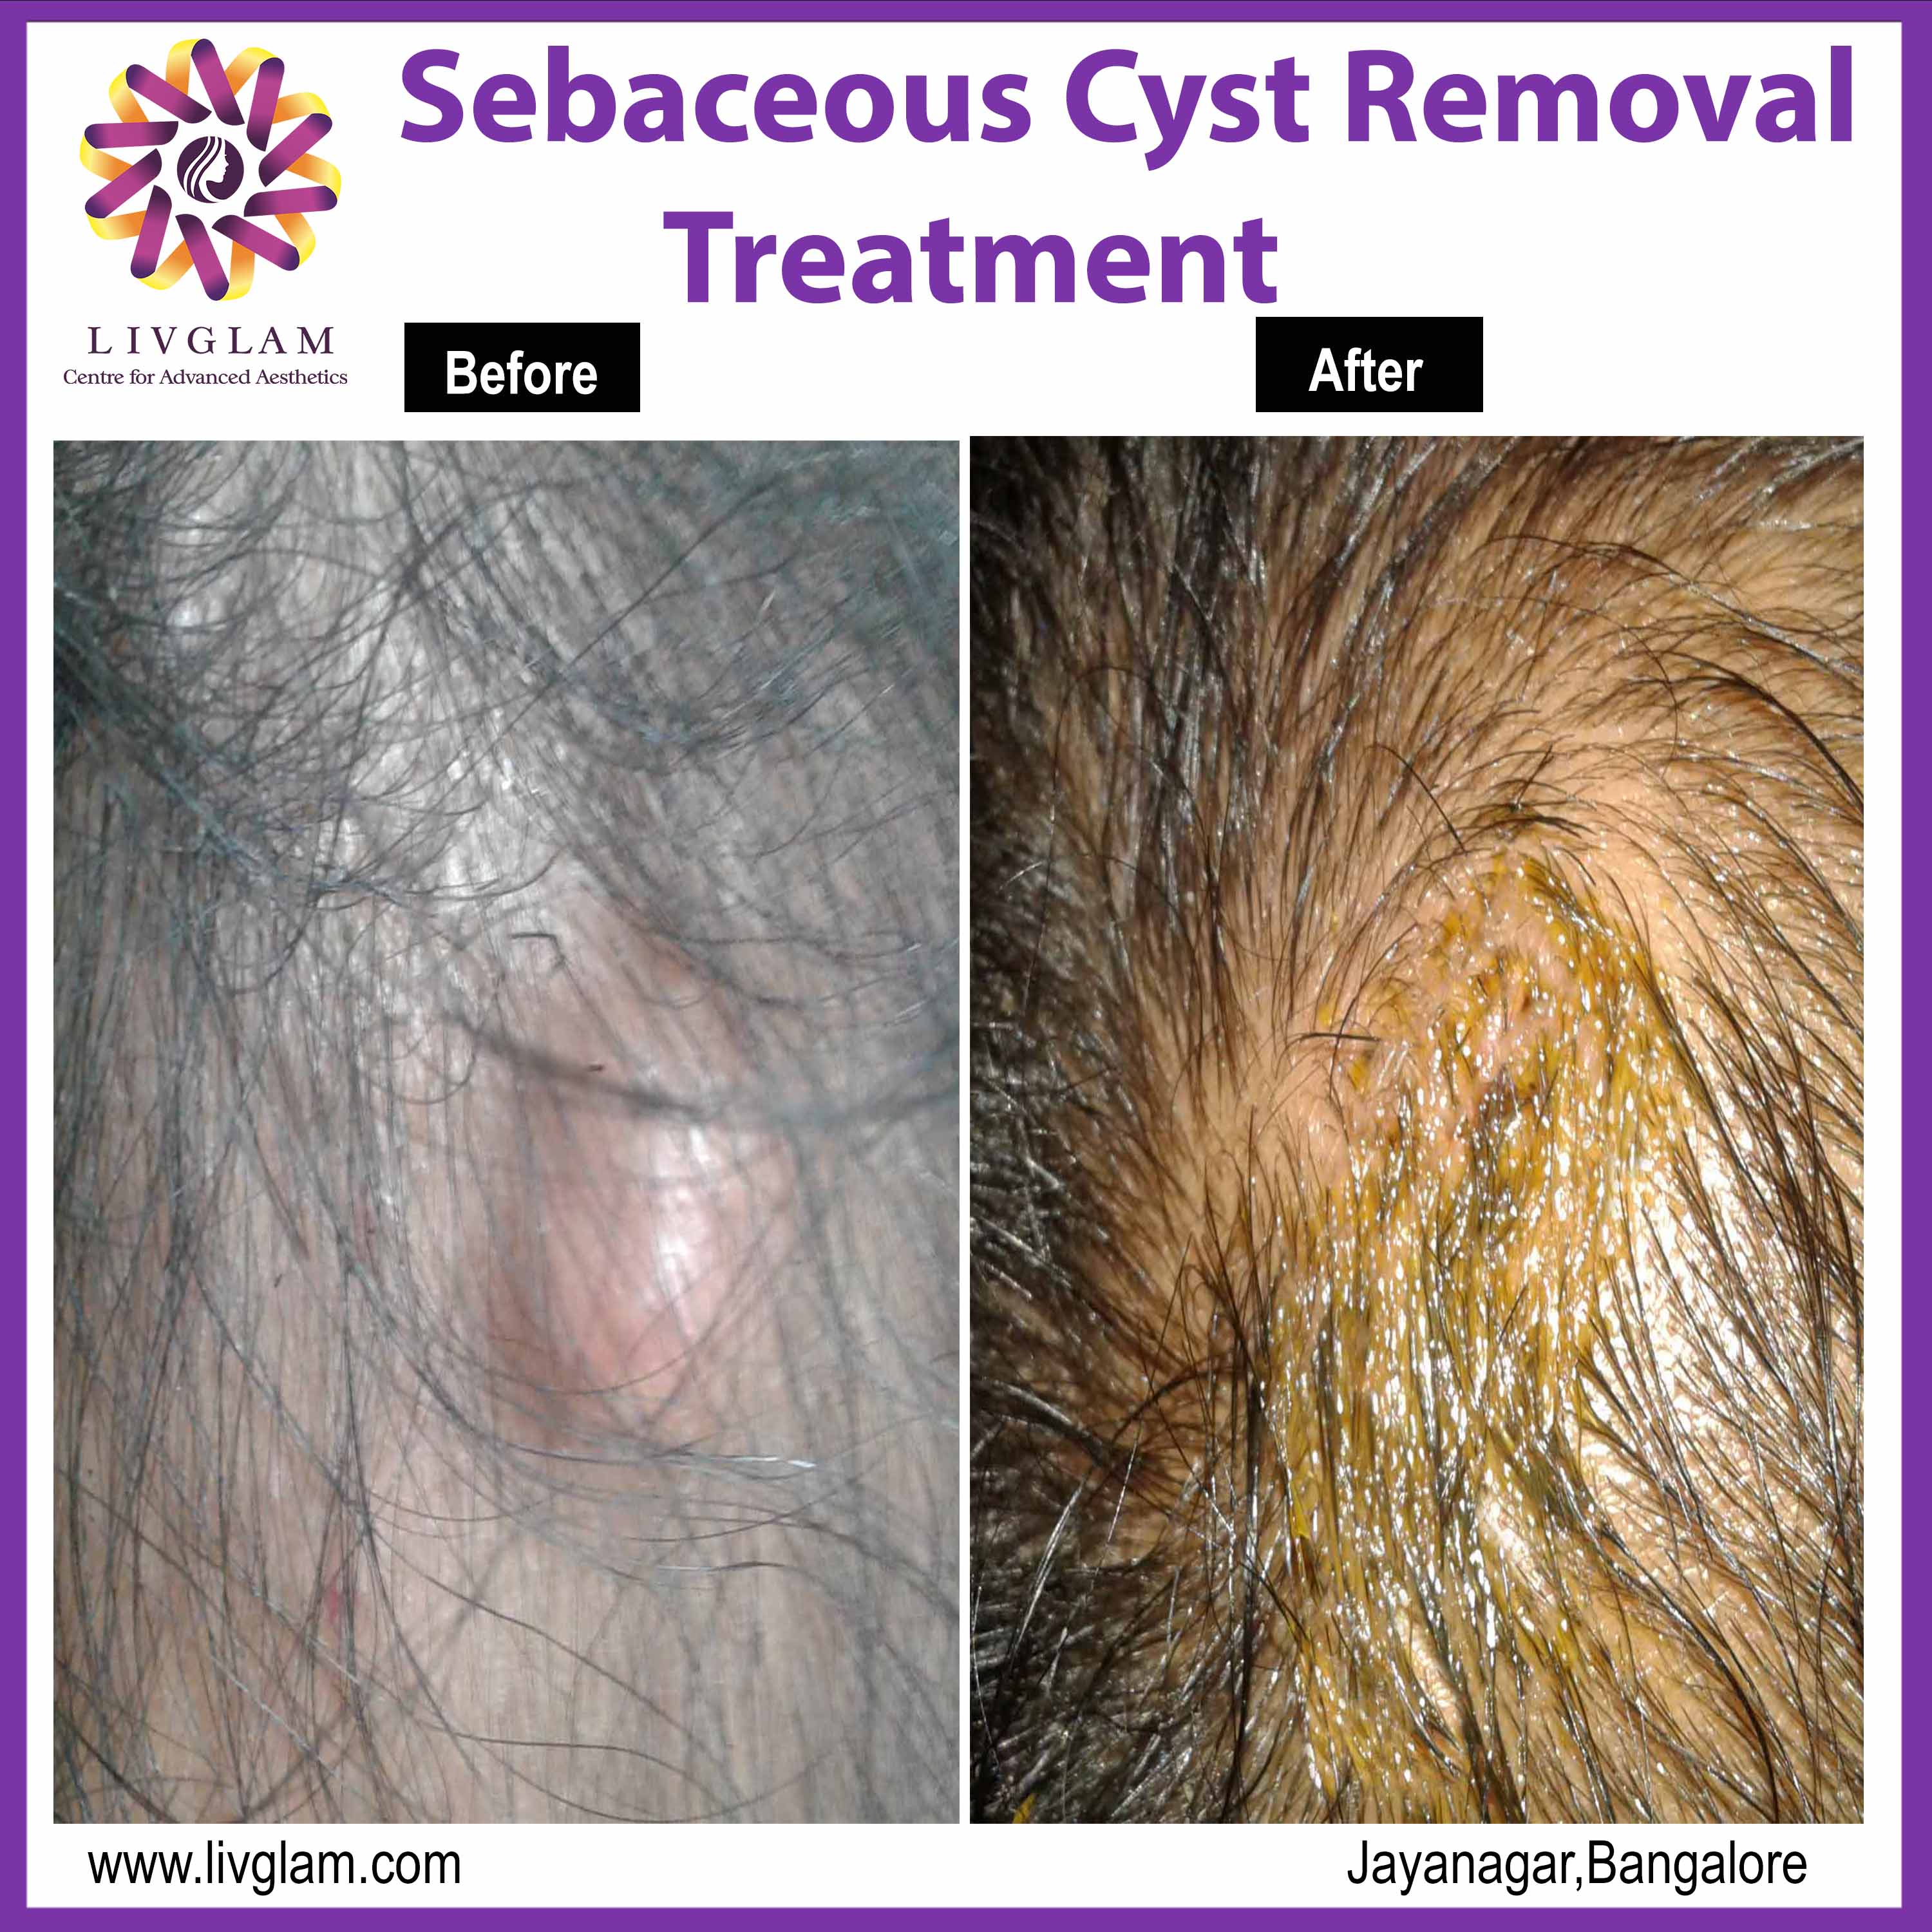 Sebaceous cyst removal treatment in Bangalore